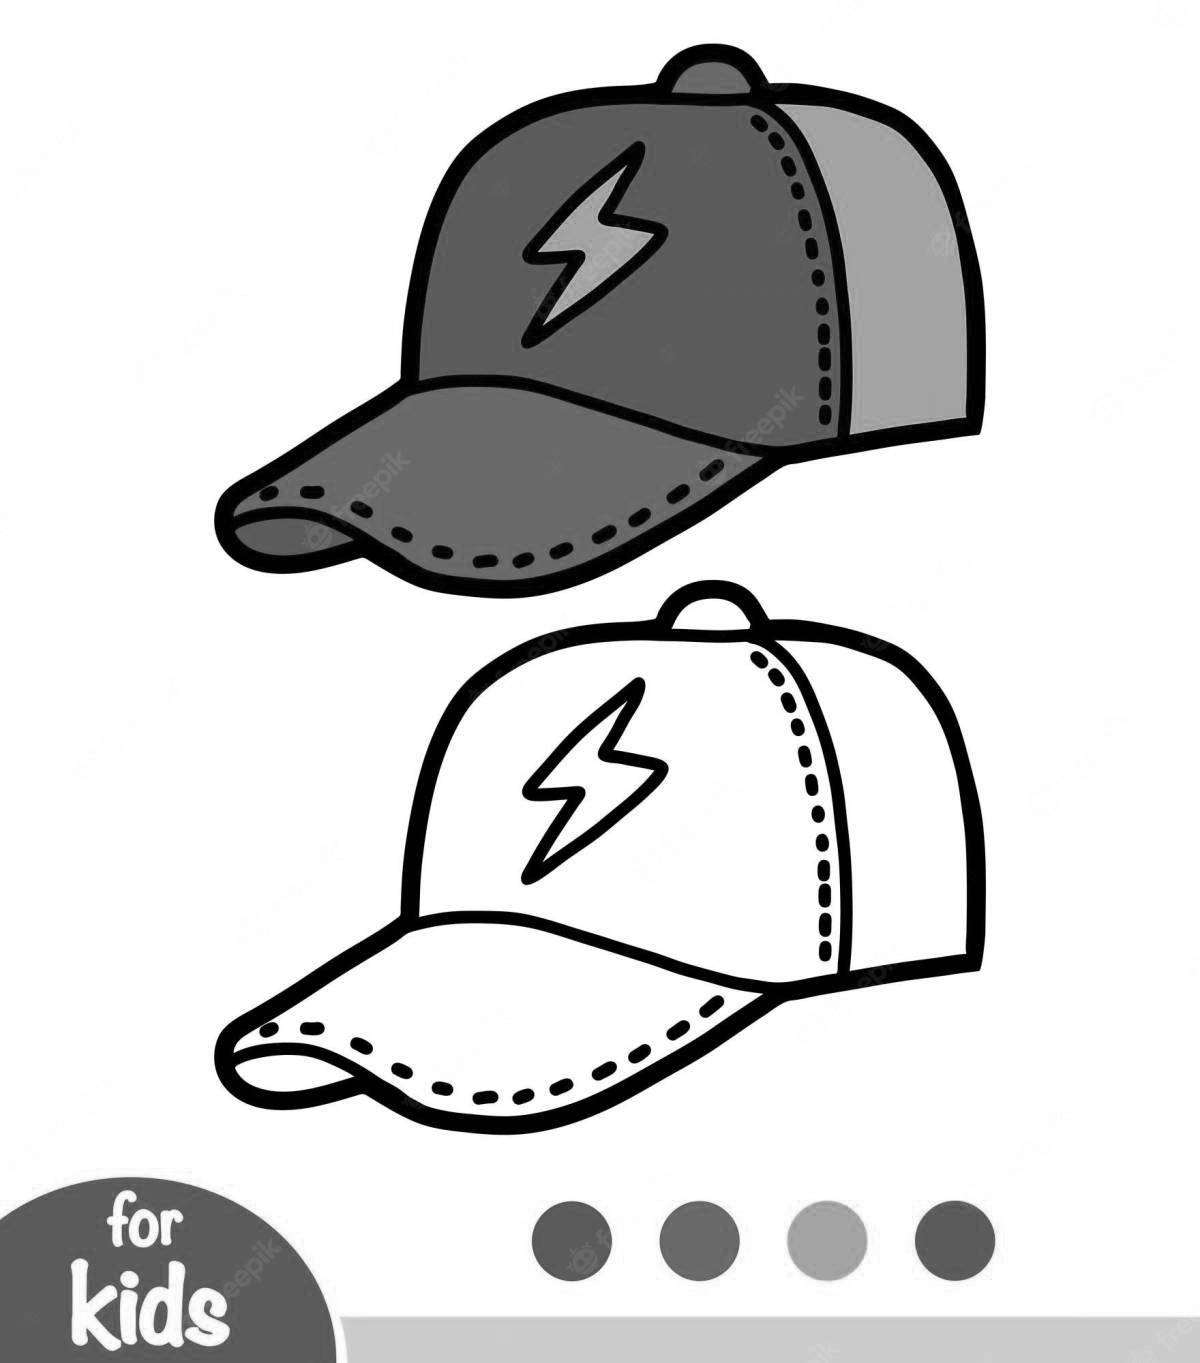 Coloring page nice cap for kids